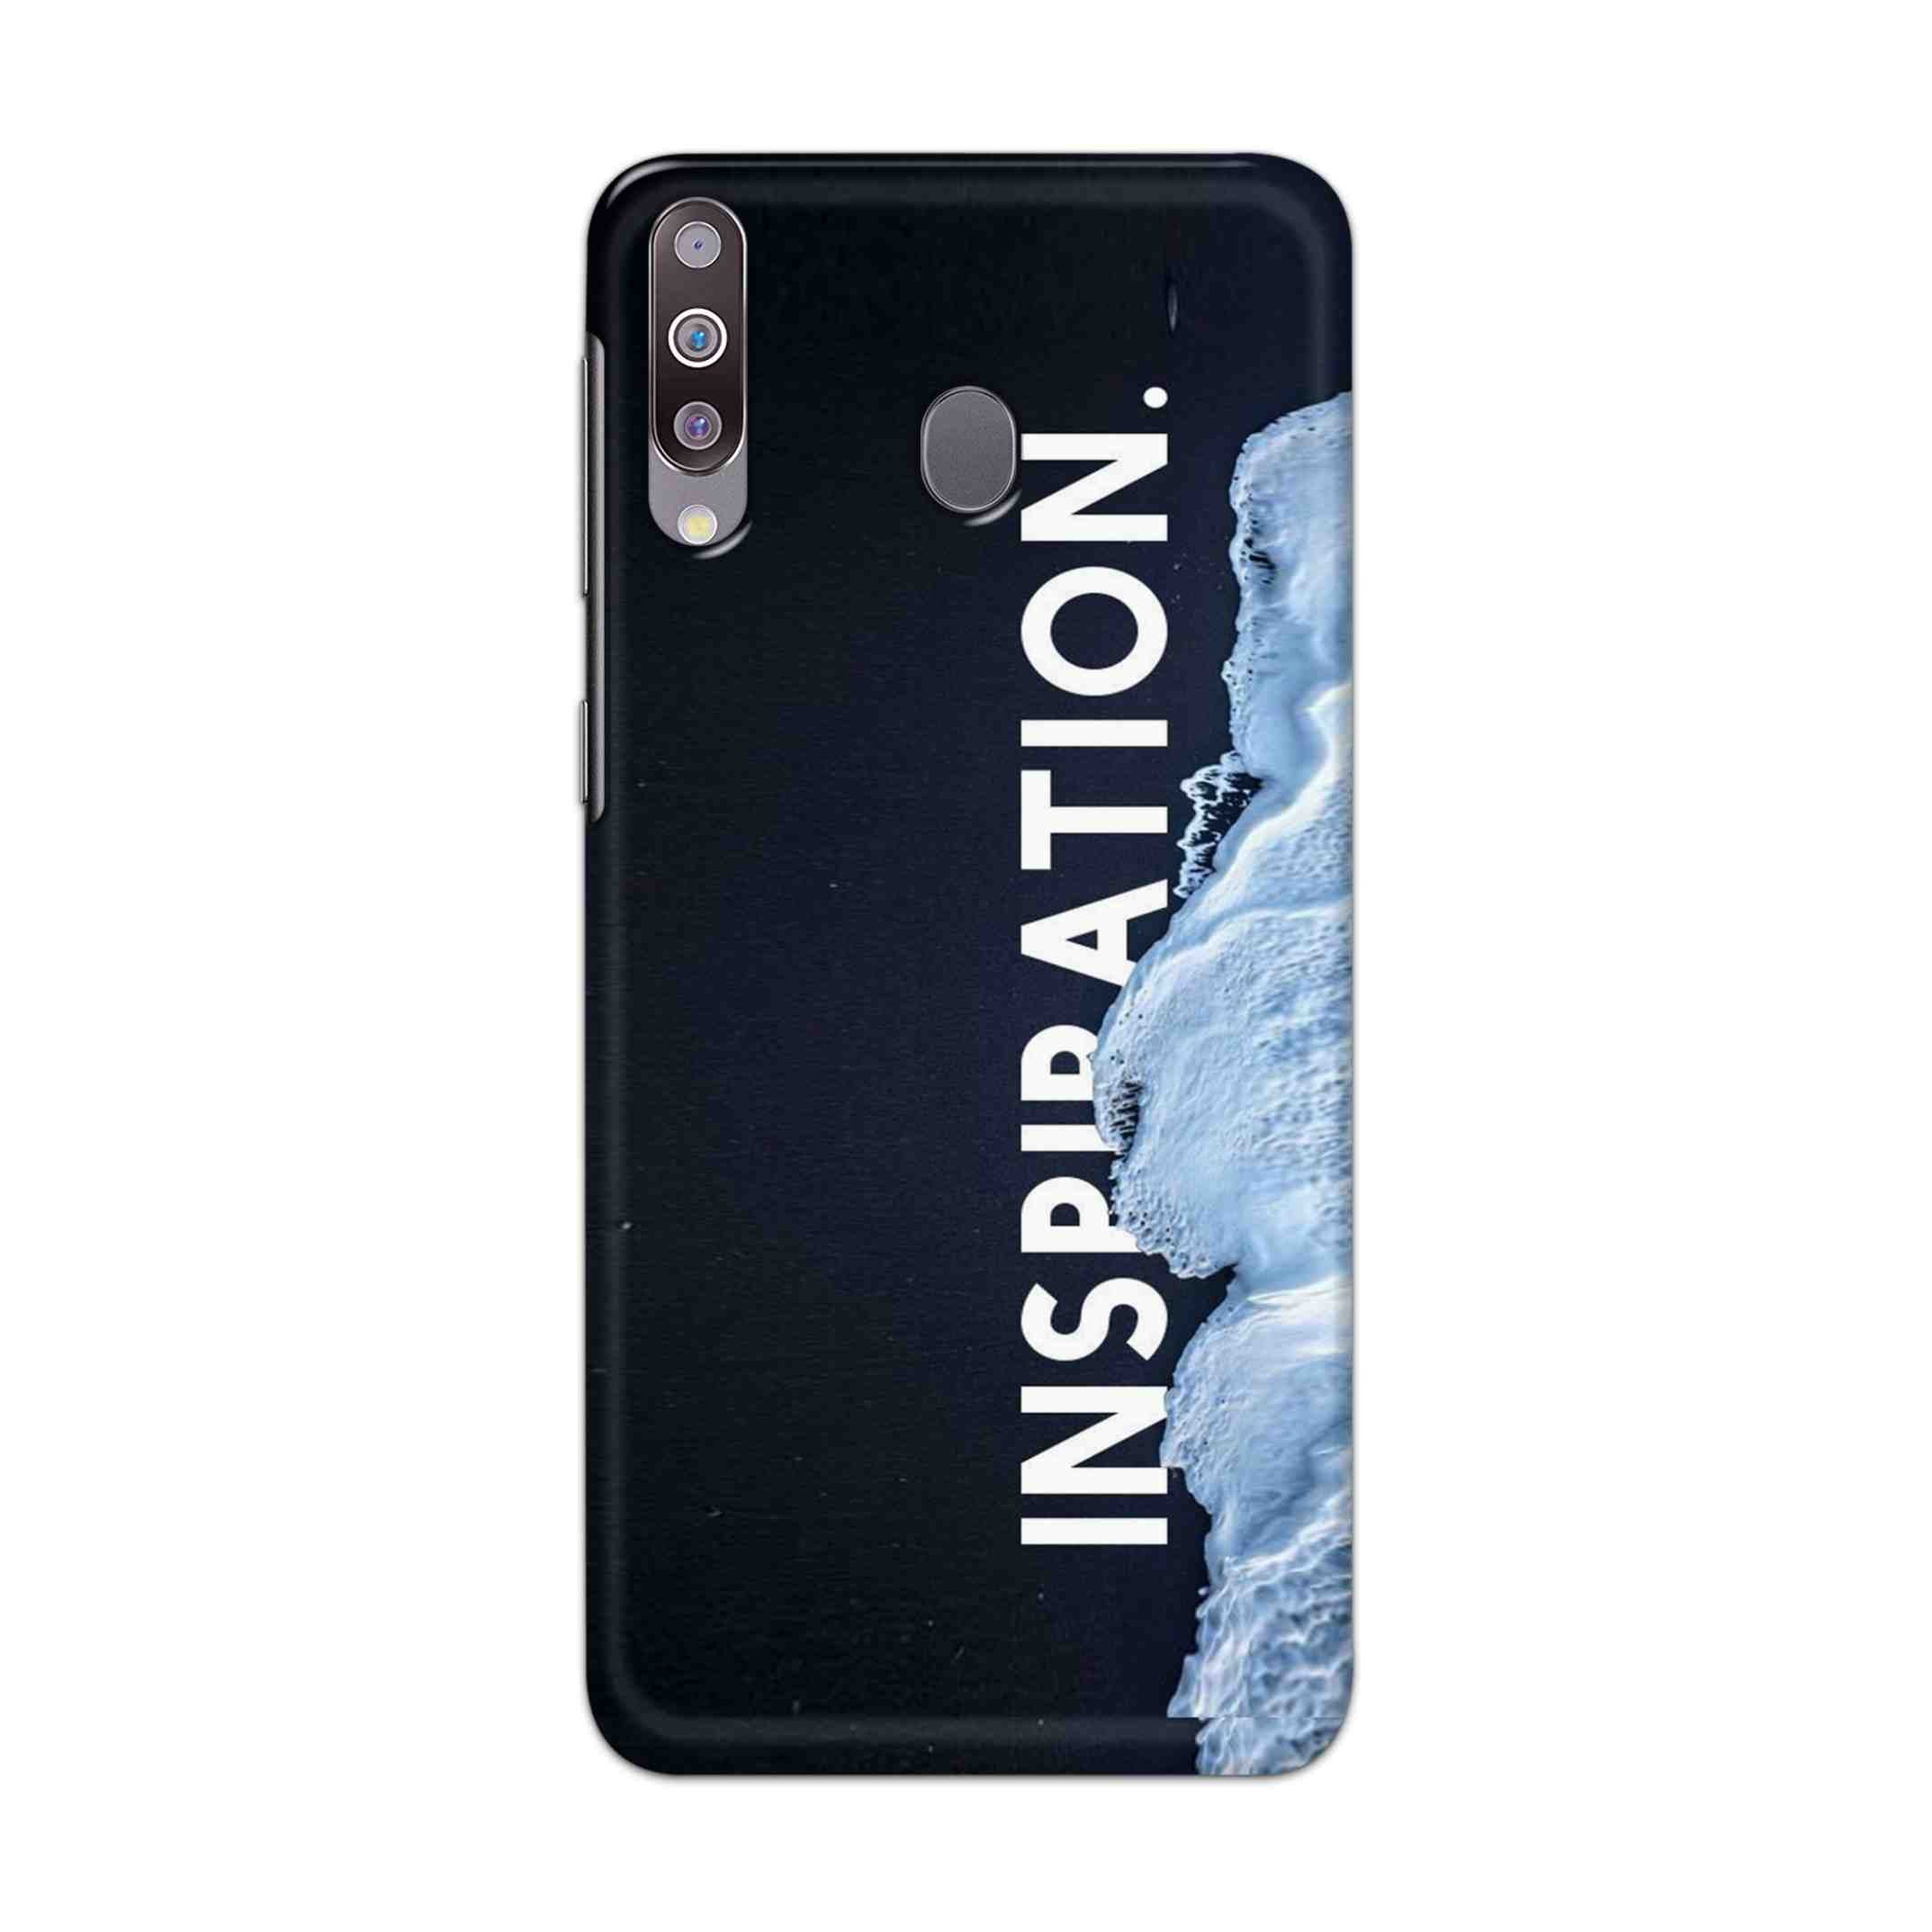 Buy Inspiration Hard Back Mobile Phone Case Cover For Samsung Galaxy M30 Online